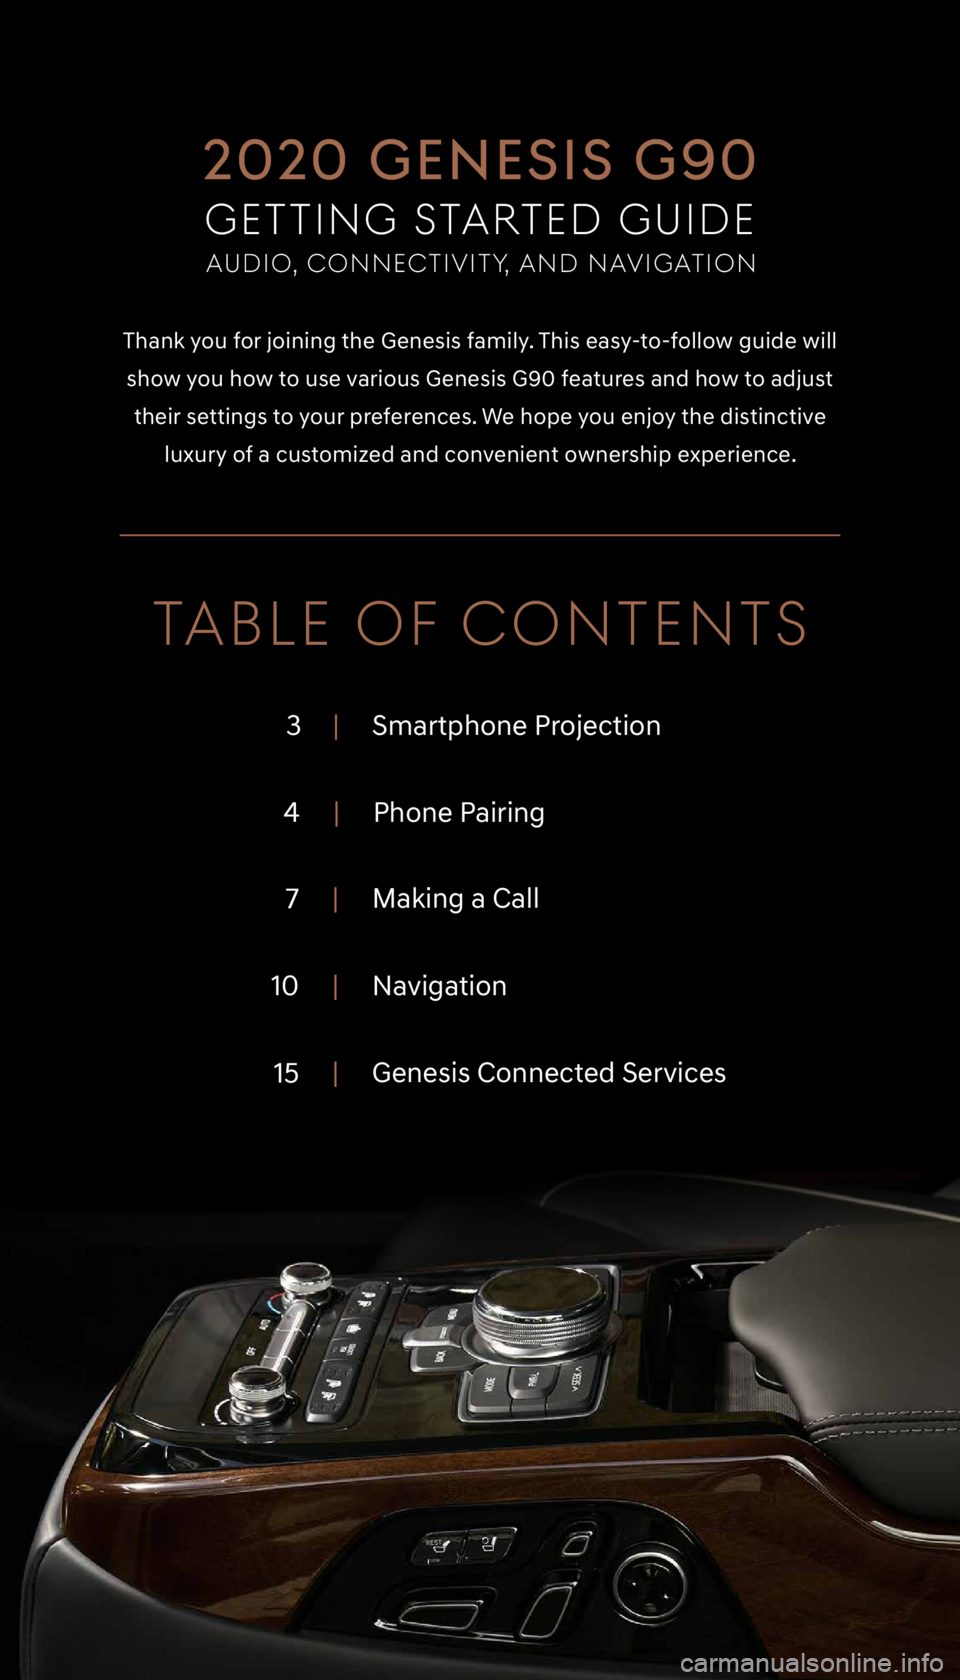 GENESIS G90 2020  Getting Started Guide |     Smartphone Projection
3
|     Phone Pairing
4
|      Making a Call
7
|     Navigation
10
|     Genesis Connected Services
15 
Thank you for joining the Genesis family. This easy-to-follow guide 